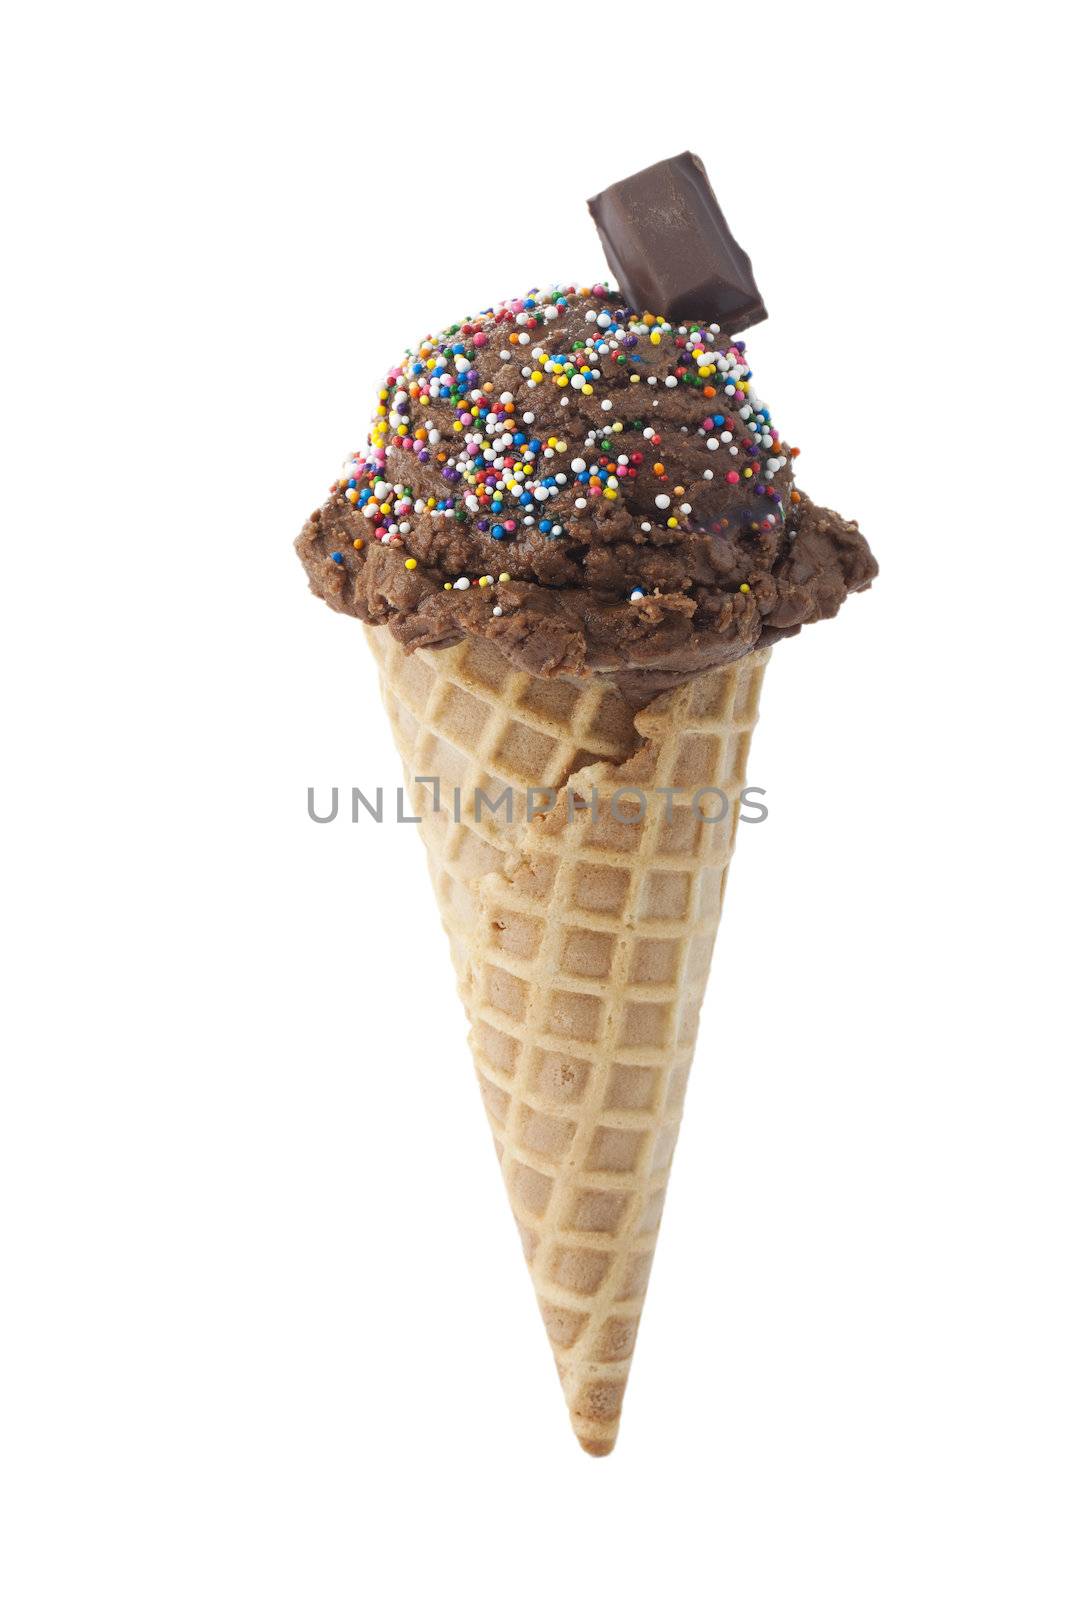 cone of chocolate ice cream with toppings by kozzi